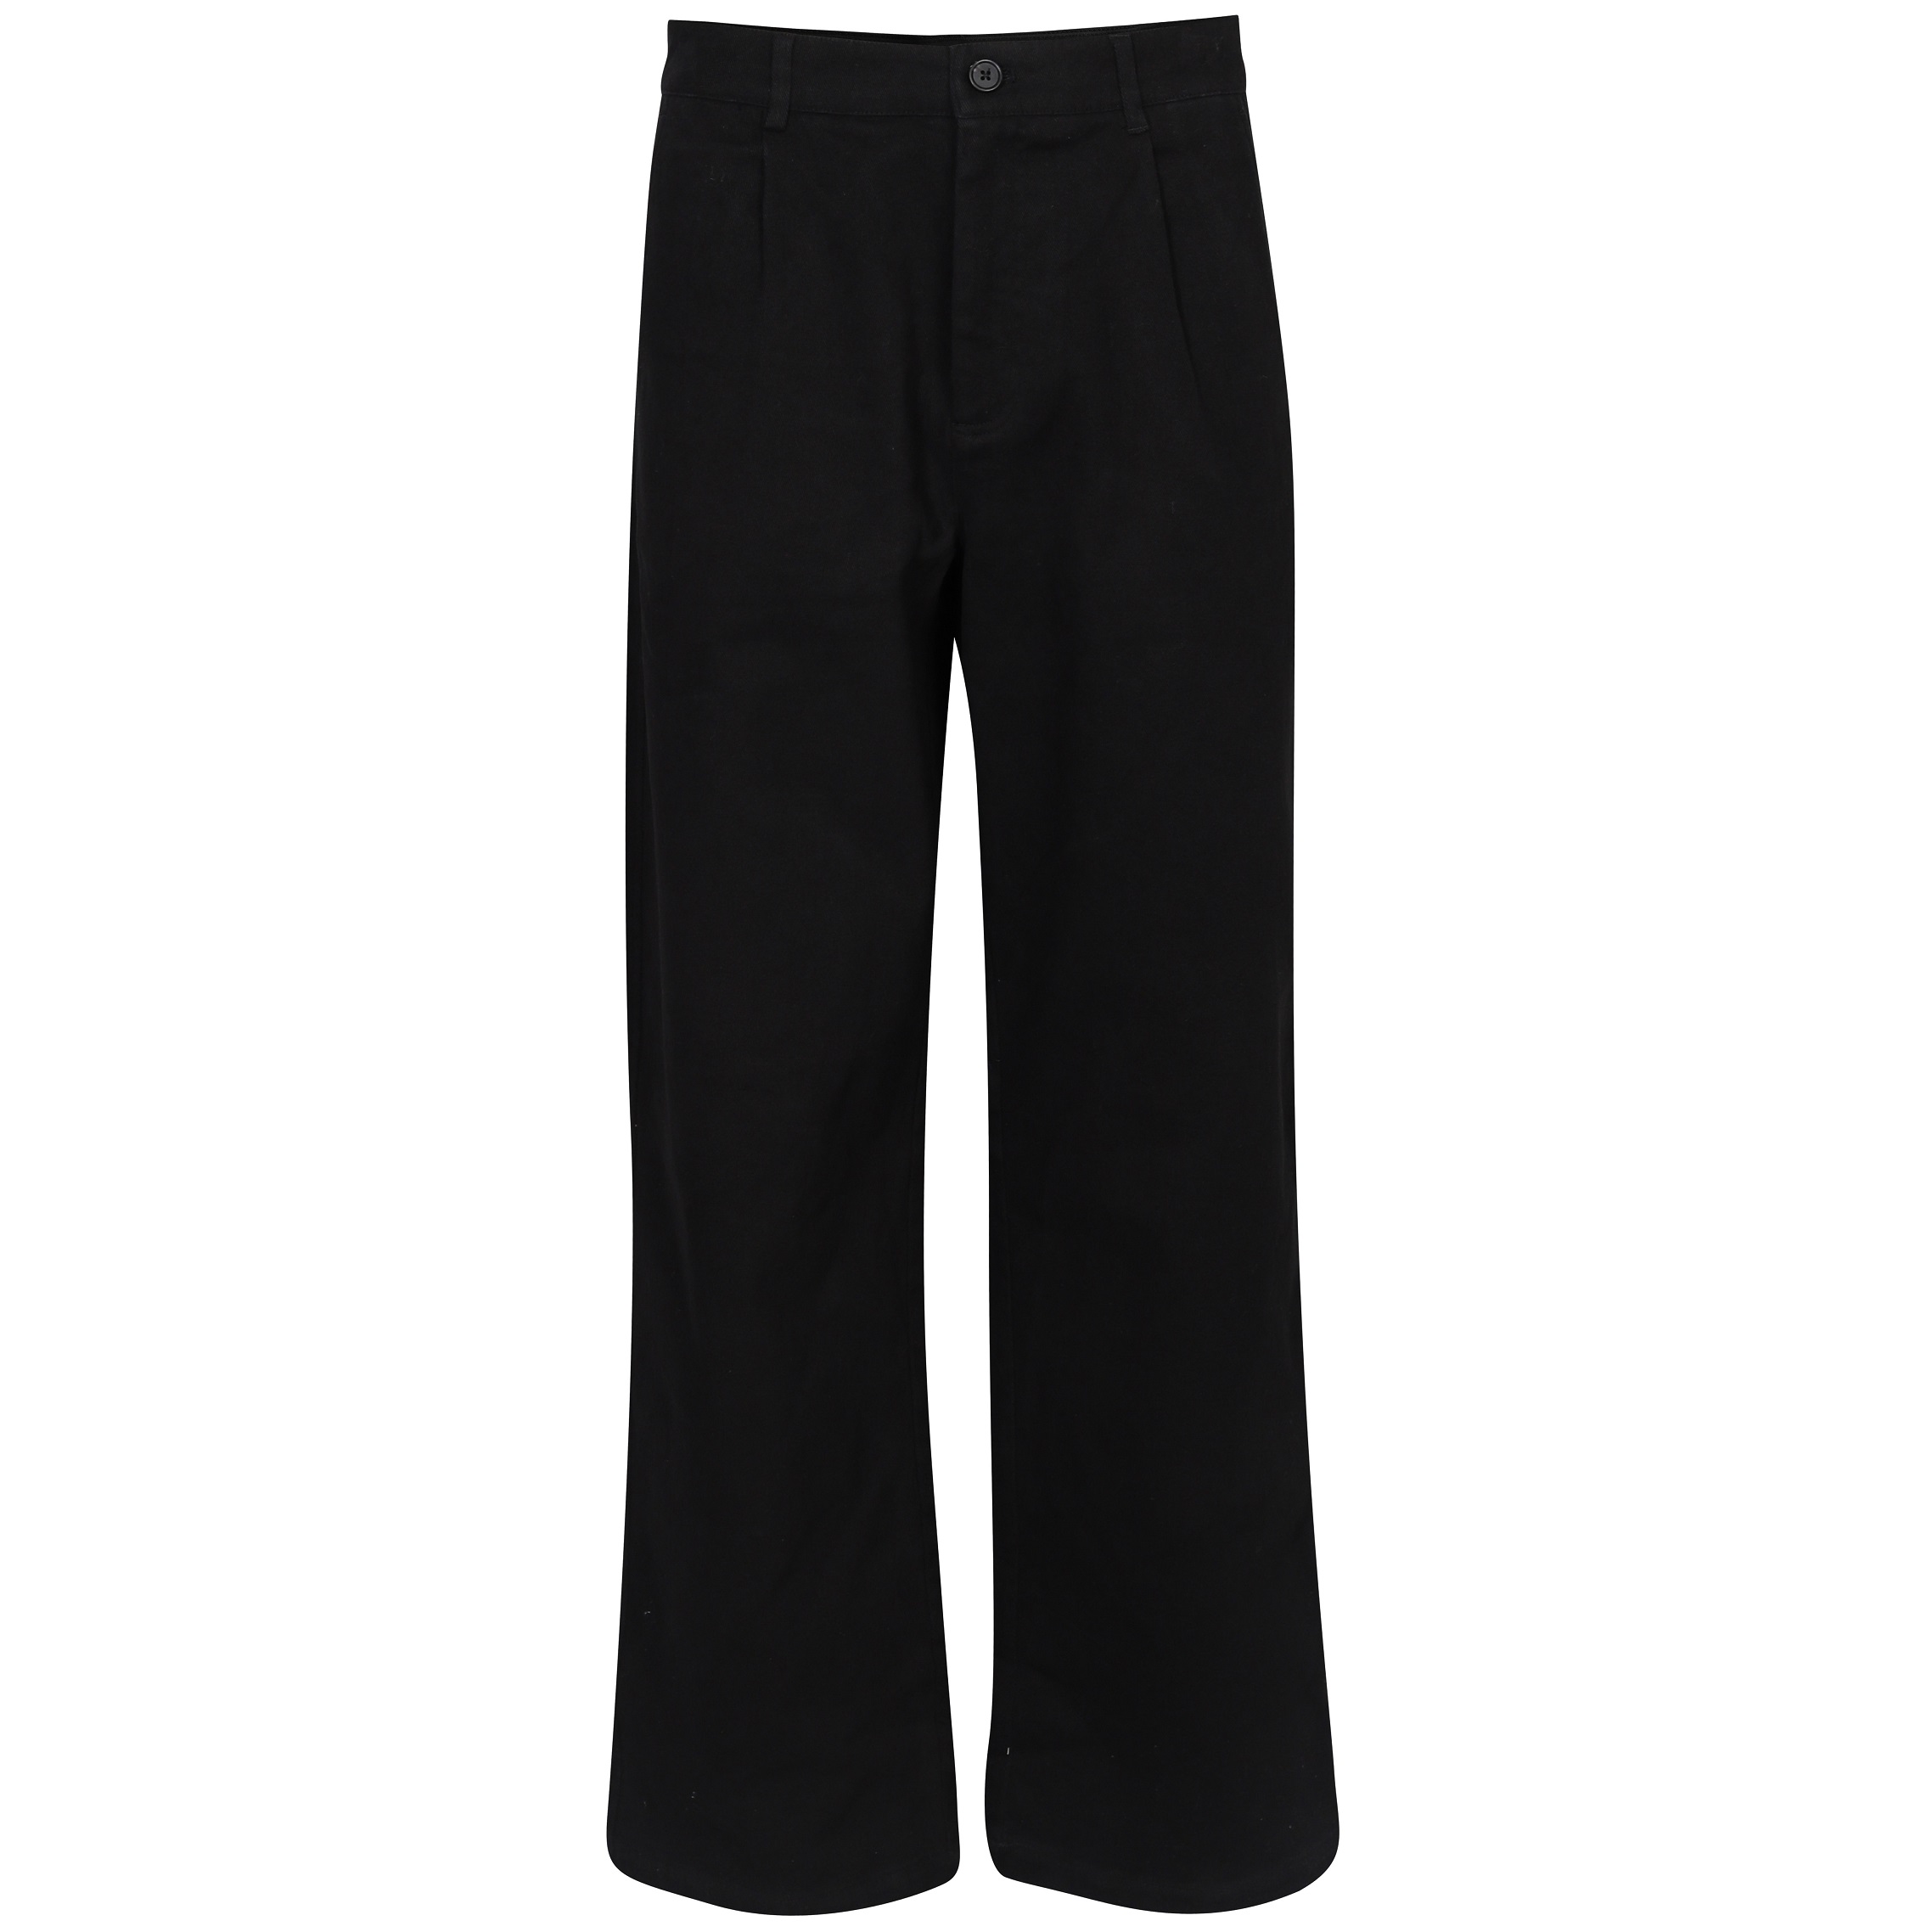 6397 Slouchy Pant in Black L